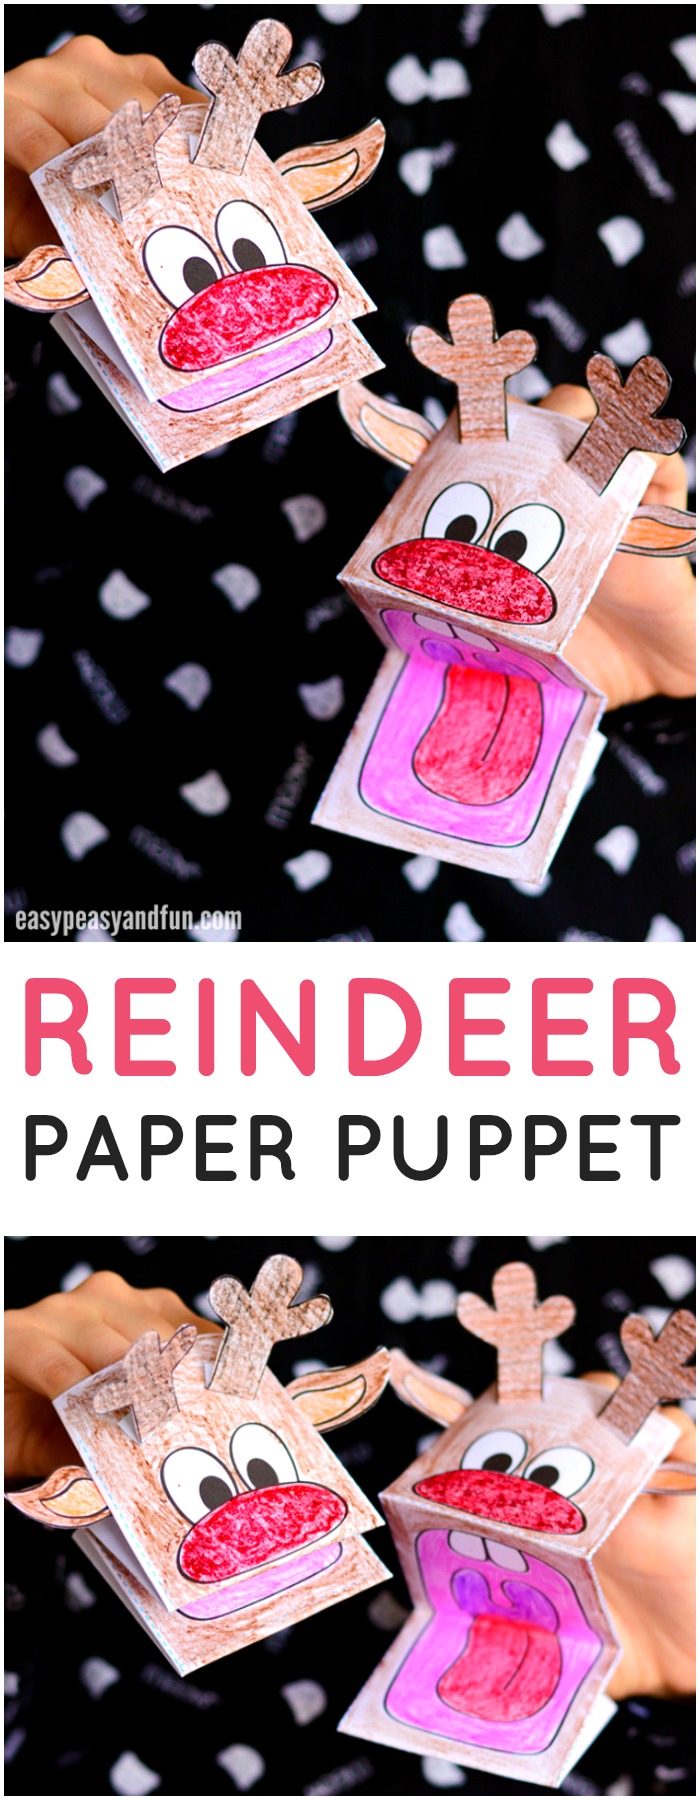 Printable reindeer paper puppet crafts. Make fun Christmas craft ideas for kids.